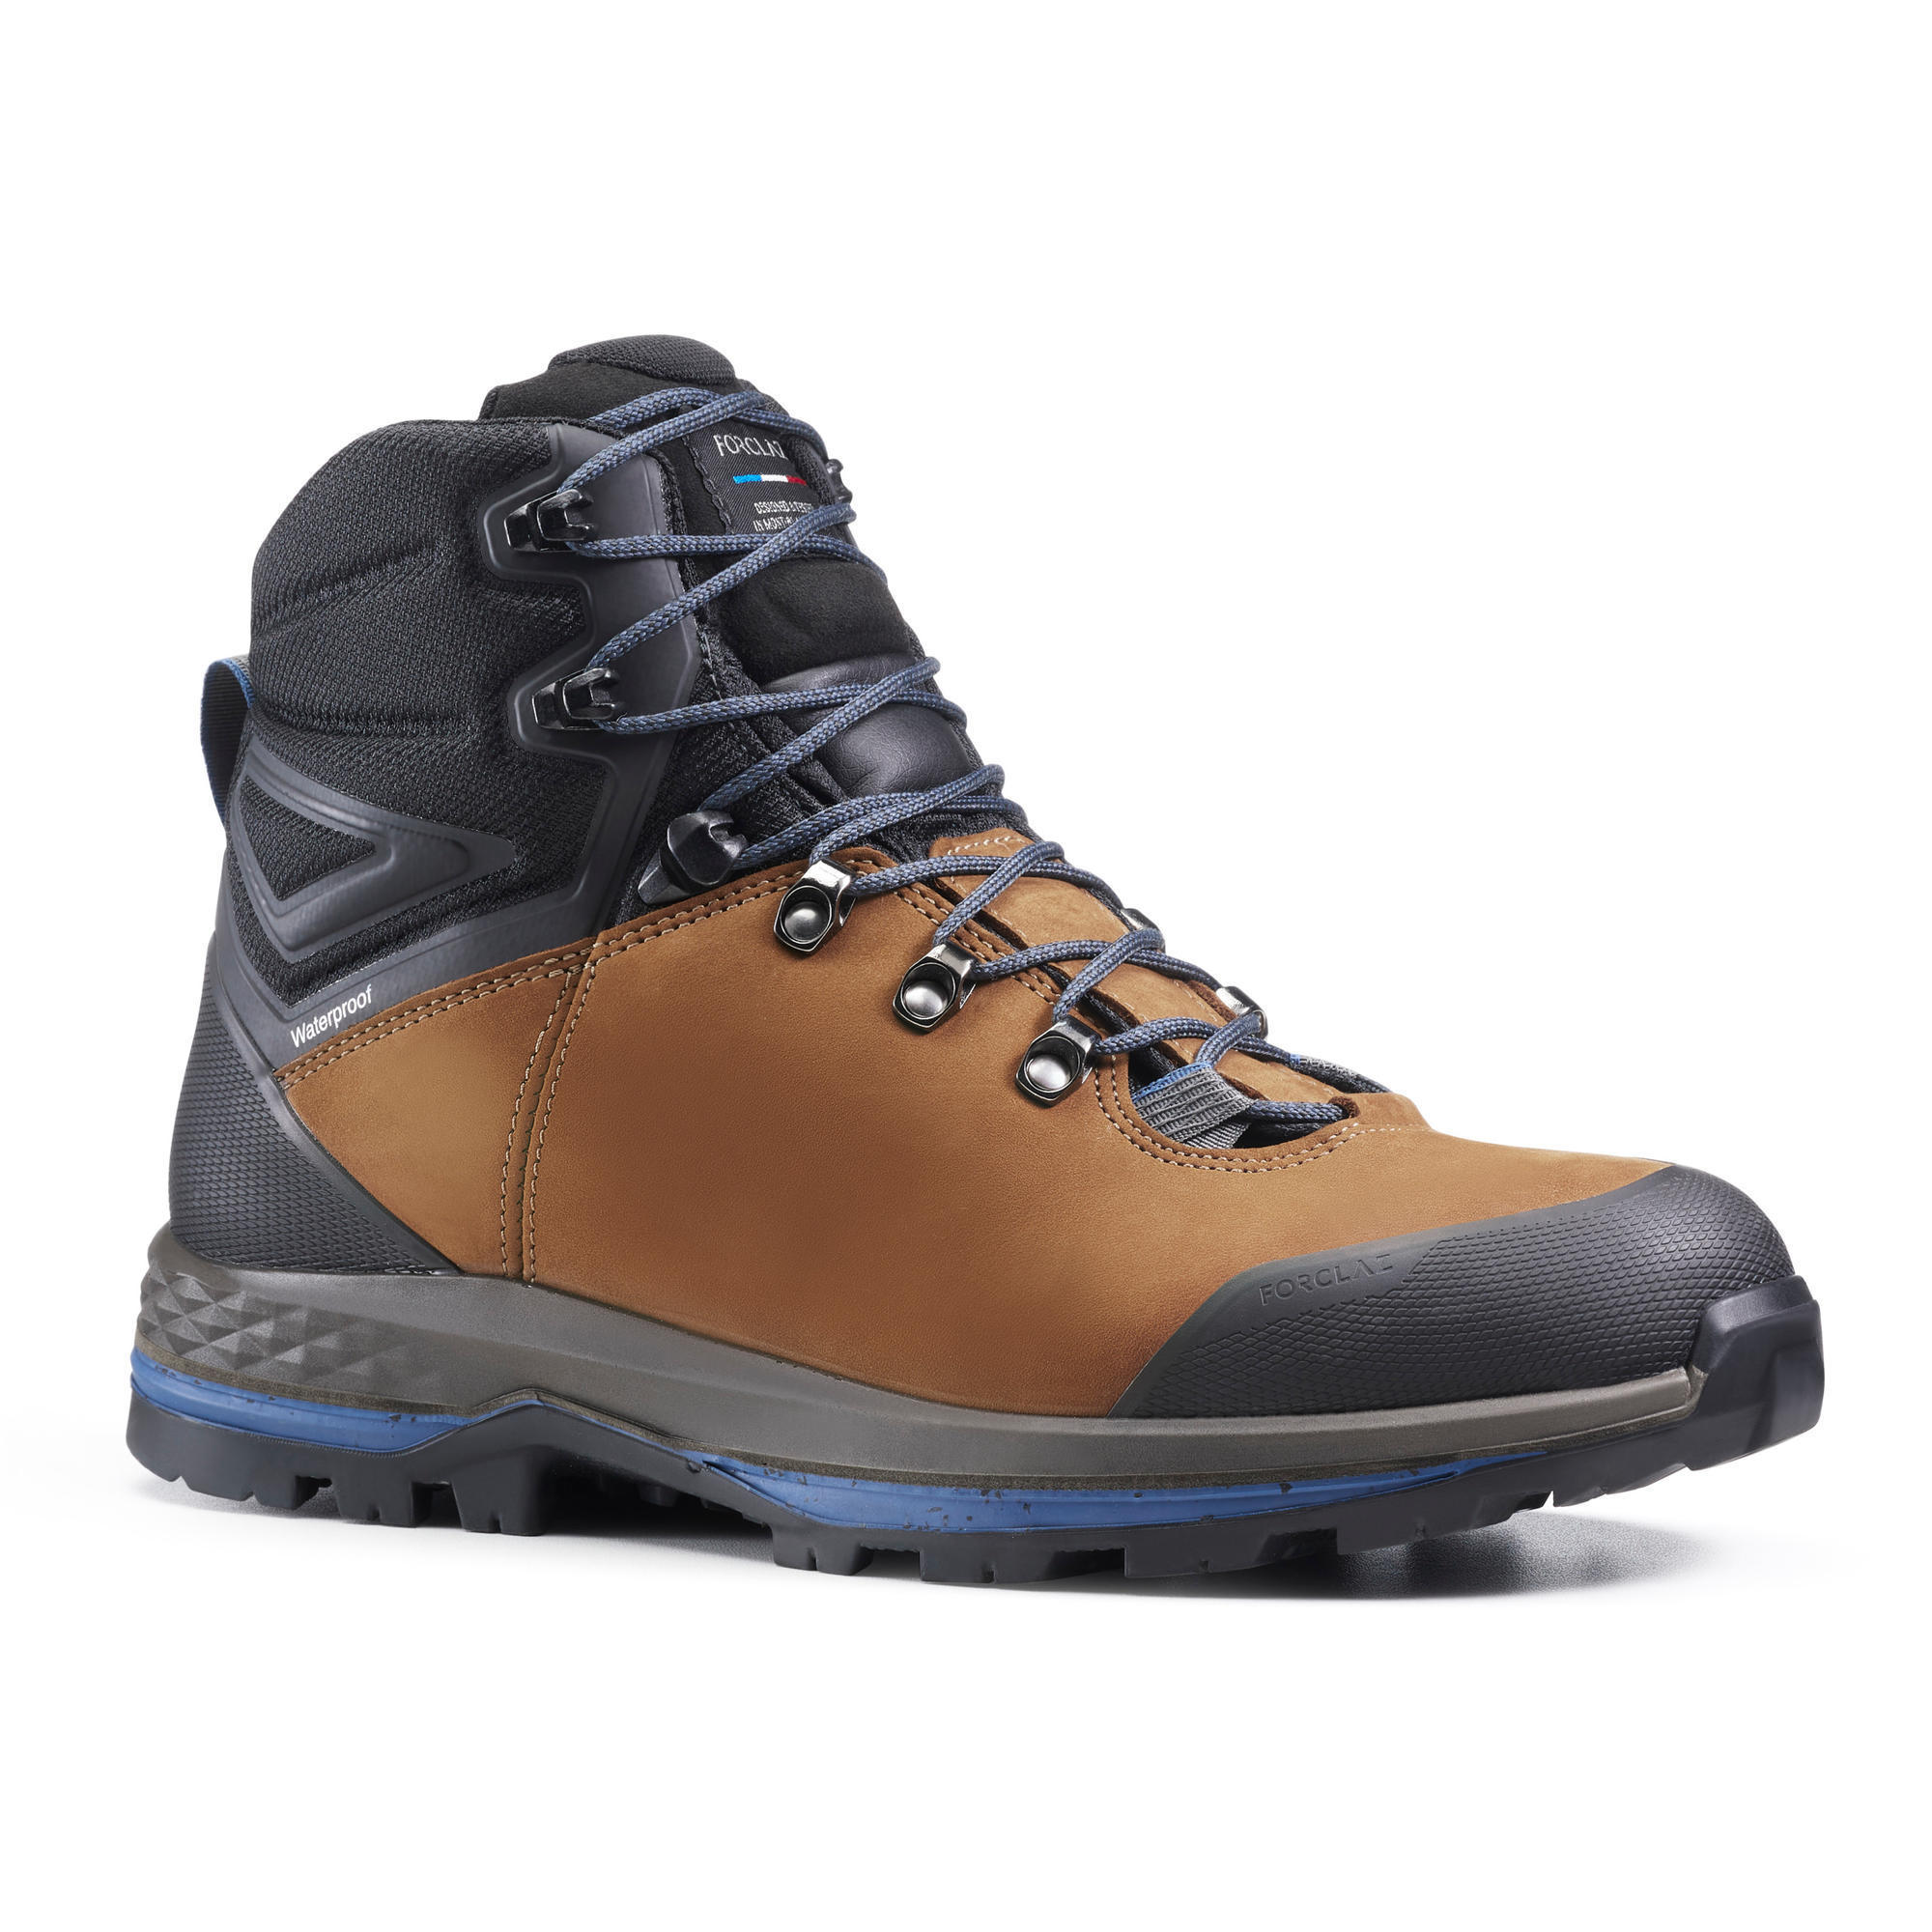 Men's Walking Boots | Hiking Boots for 